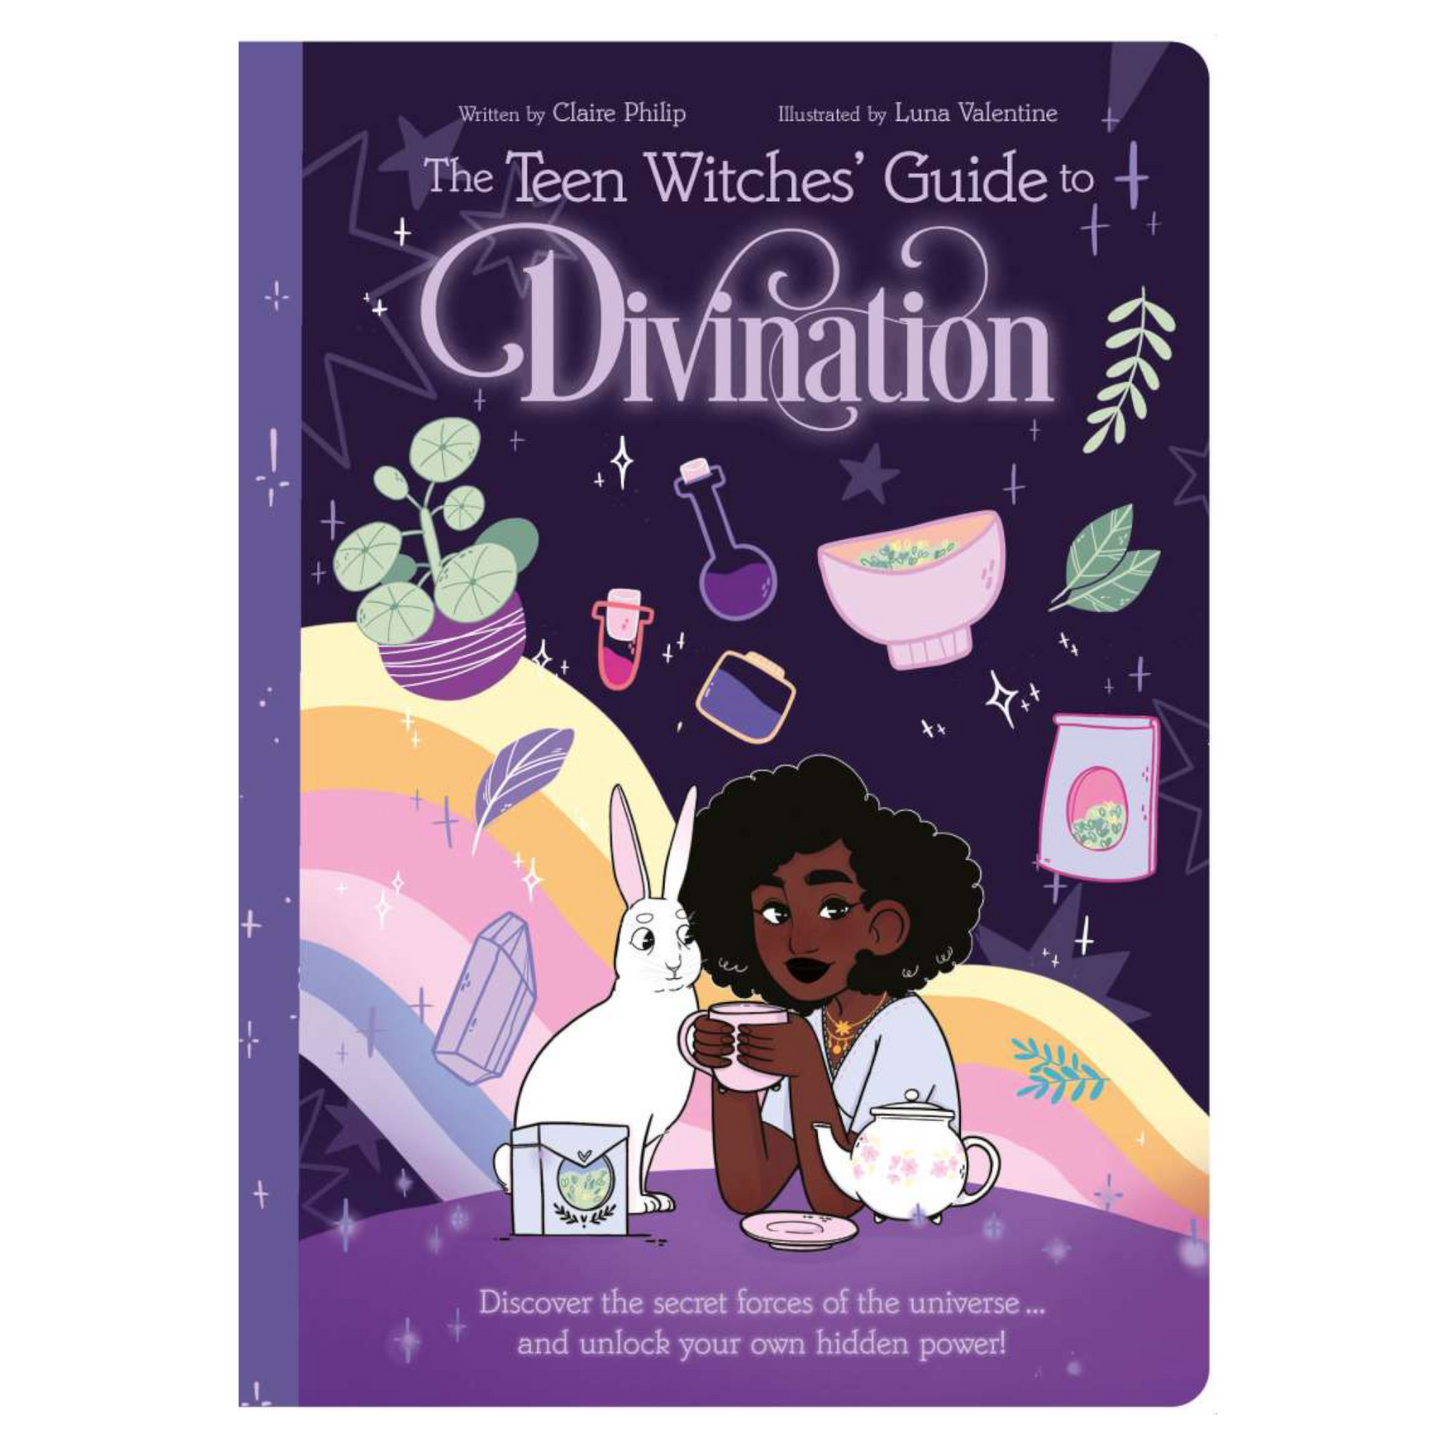 The Teen Witches' Guide To Divination